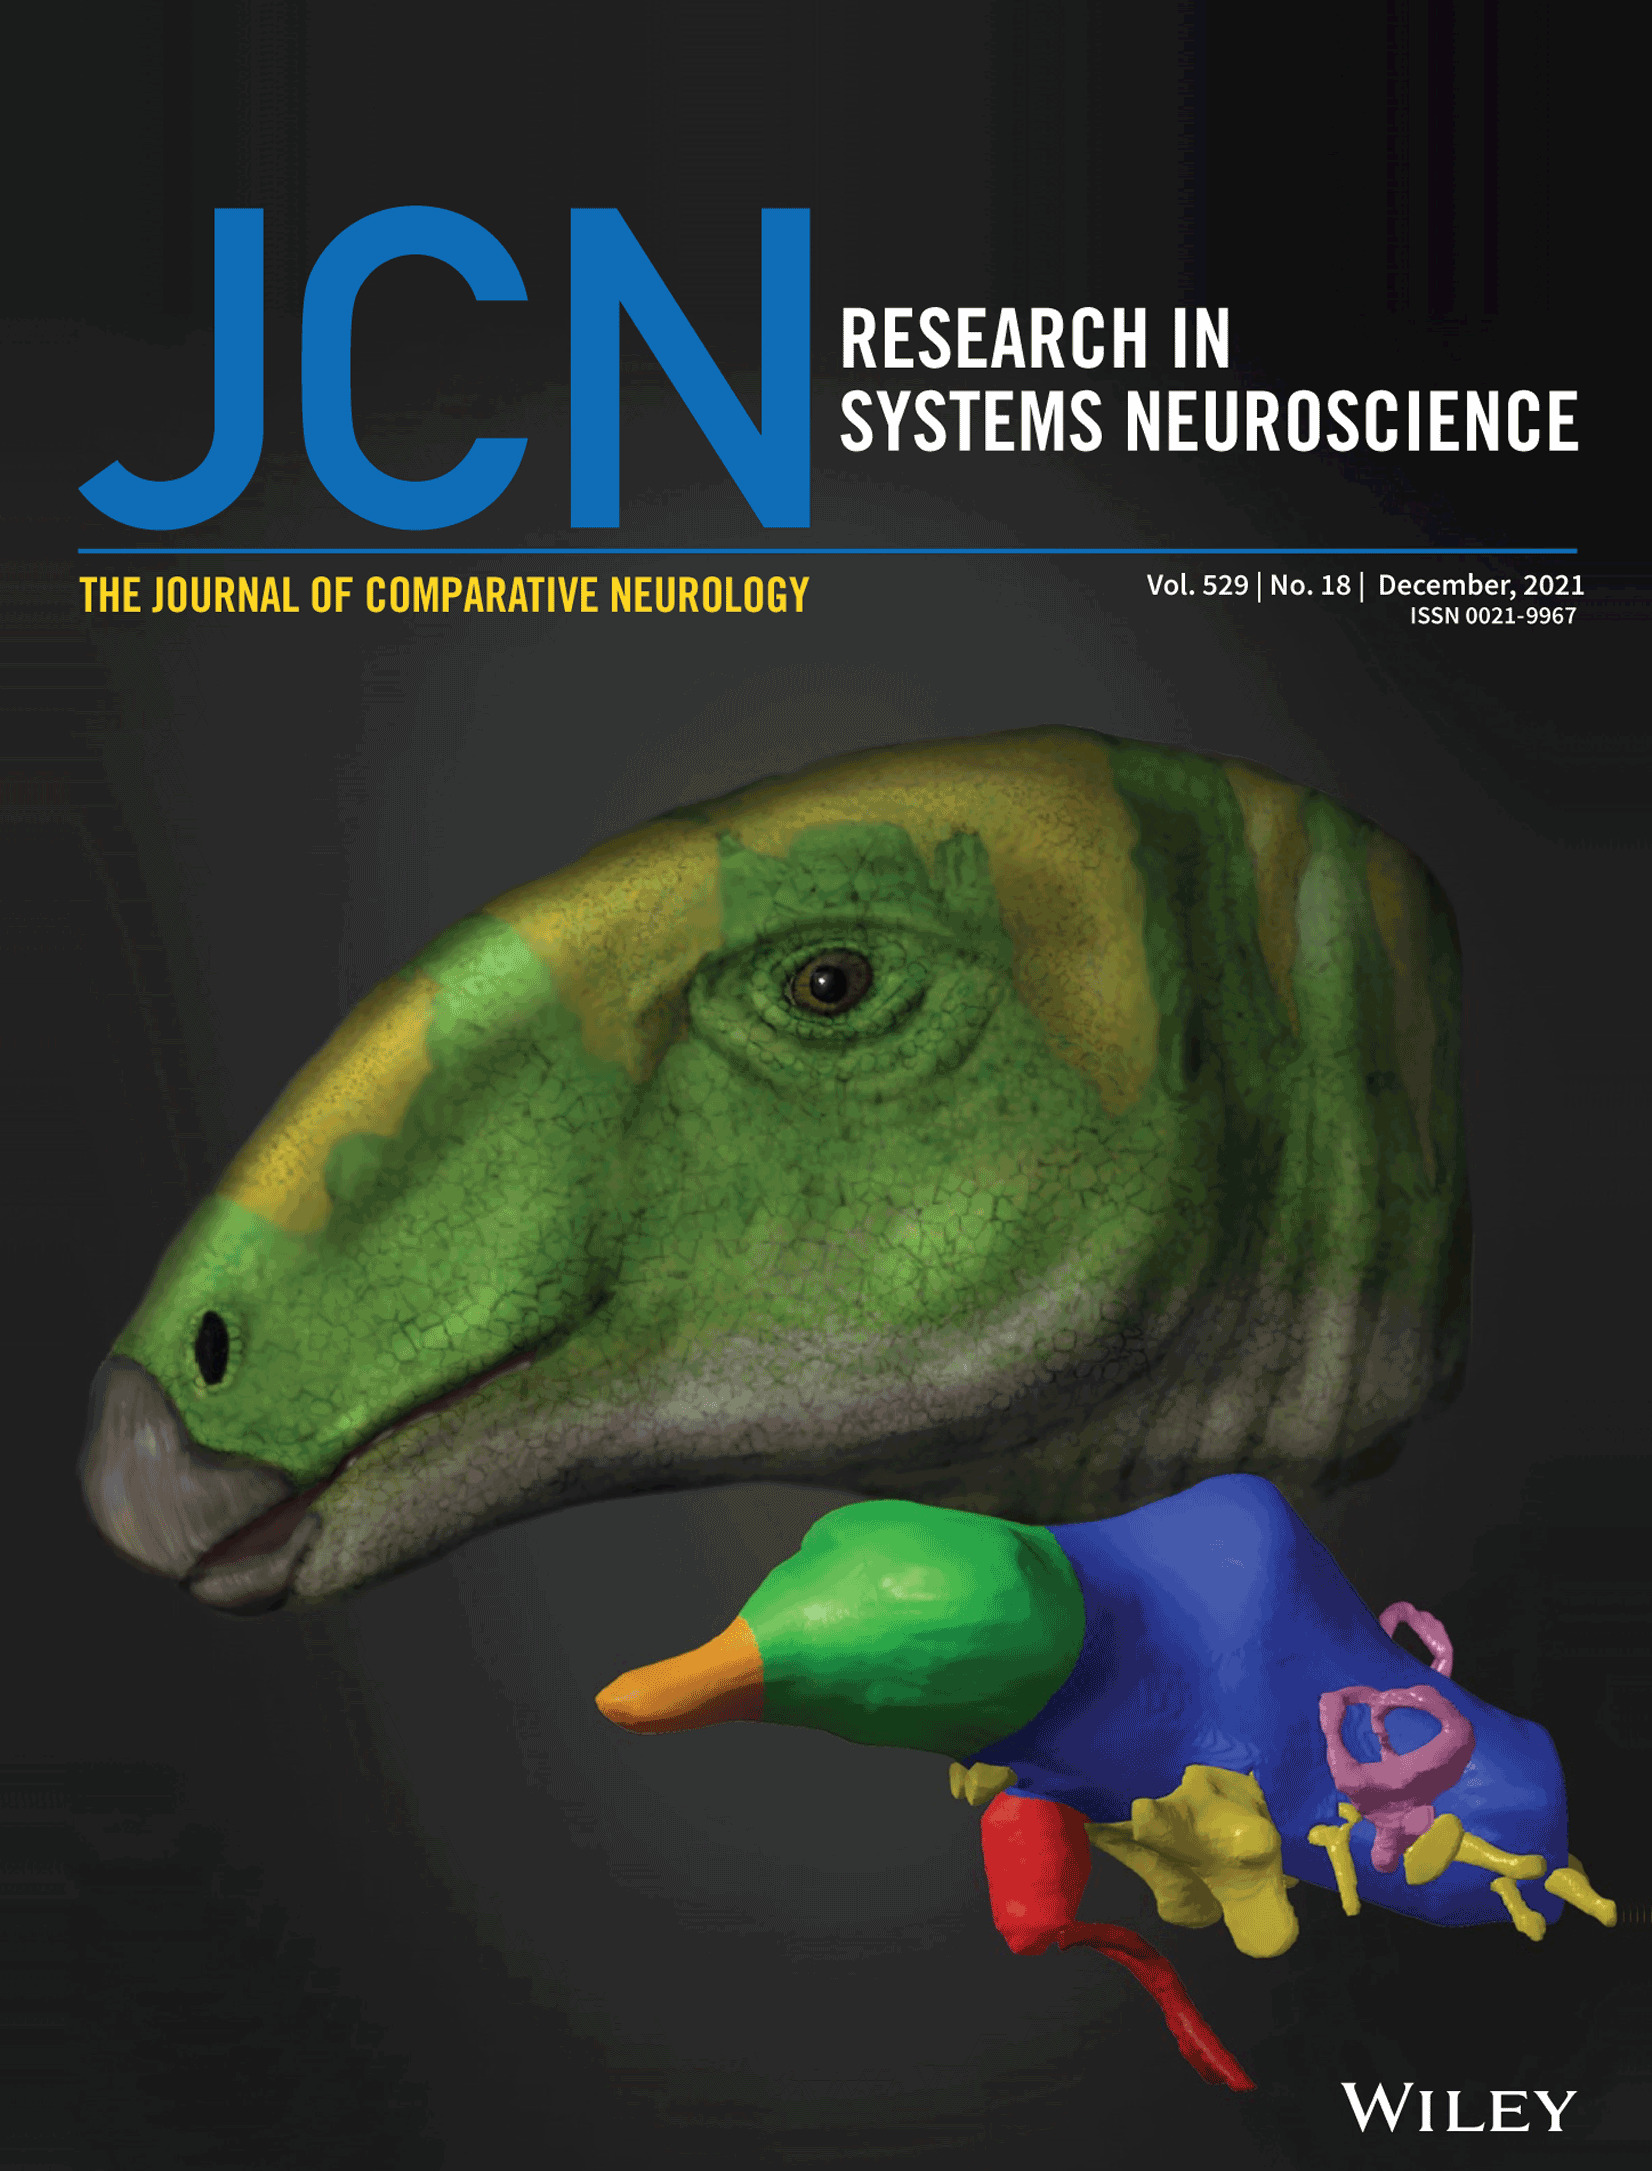 Cover Image, Volume 529, Issue 18